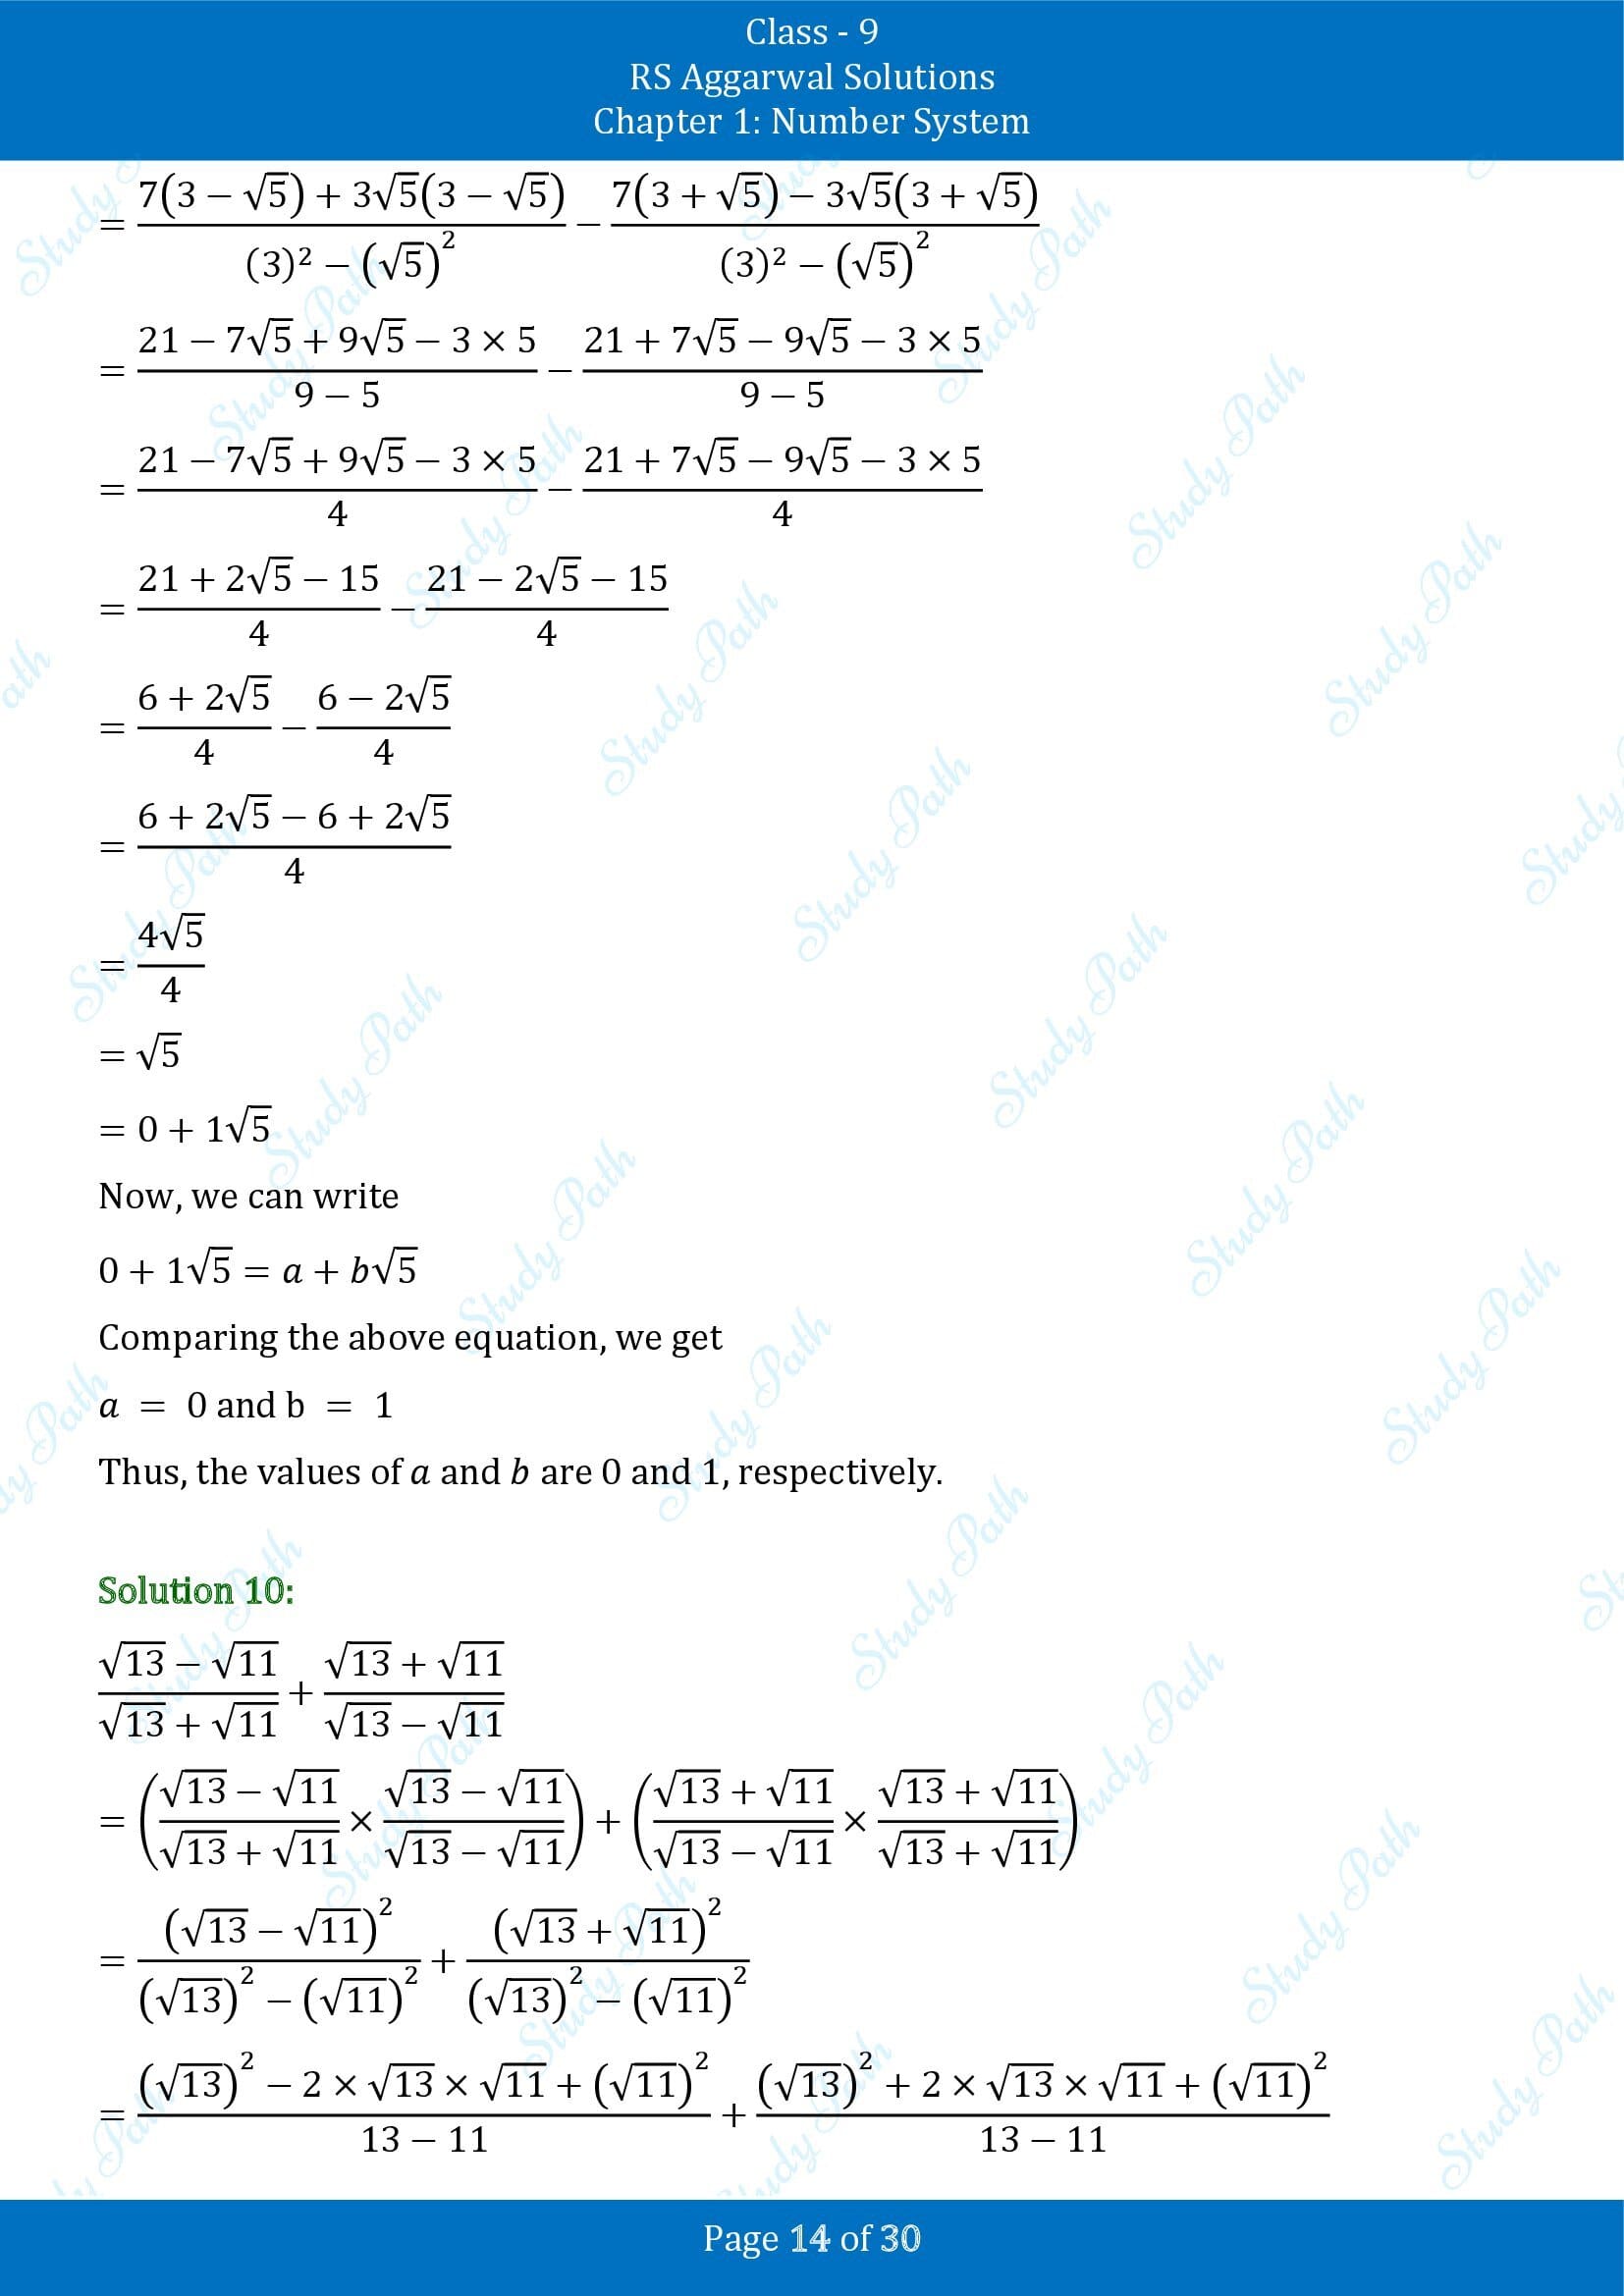 RS Aggarwal Solutions Class 9 Chapter 1 Number System Exercise 1F 00014